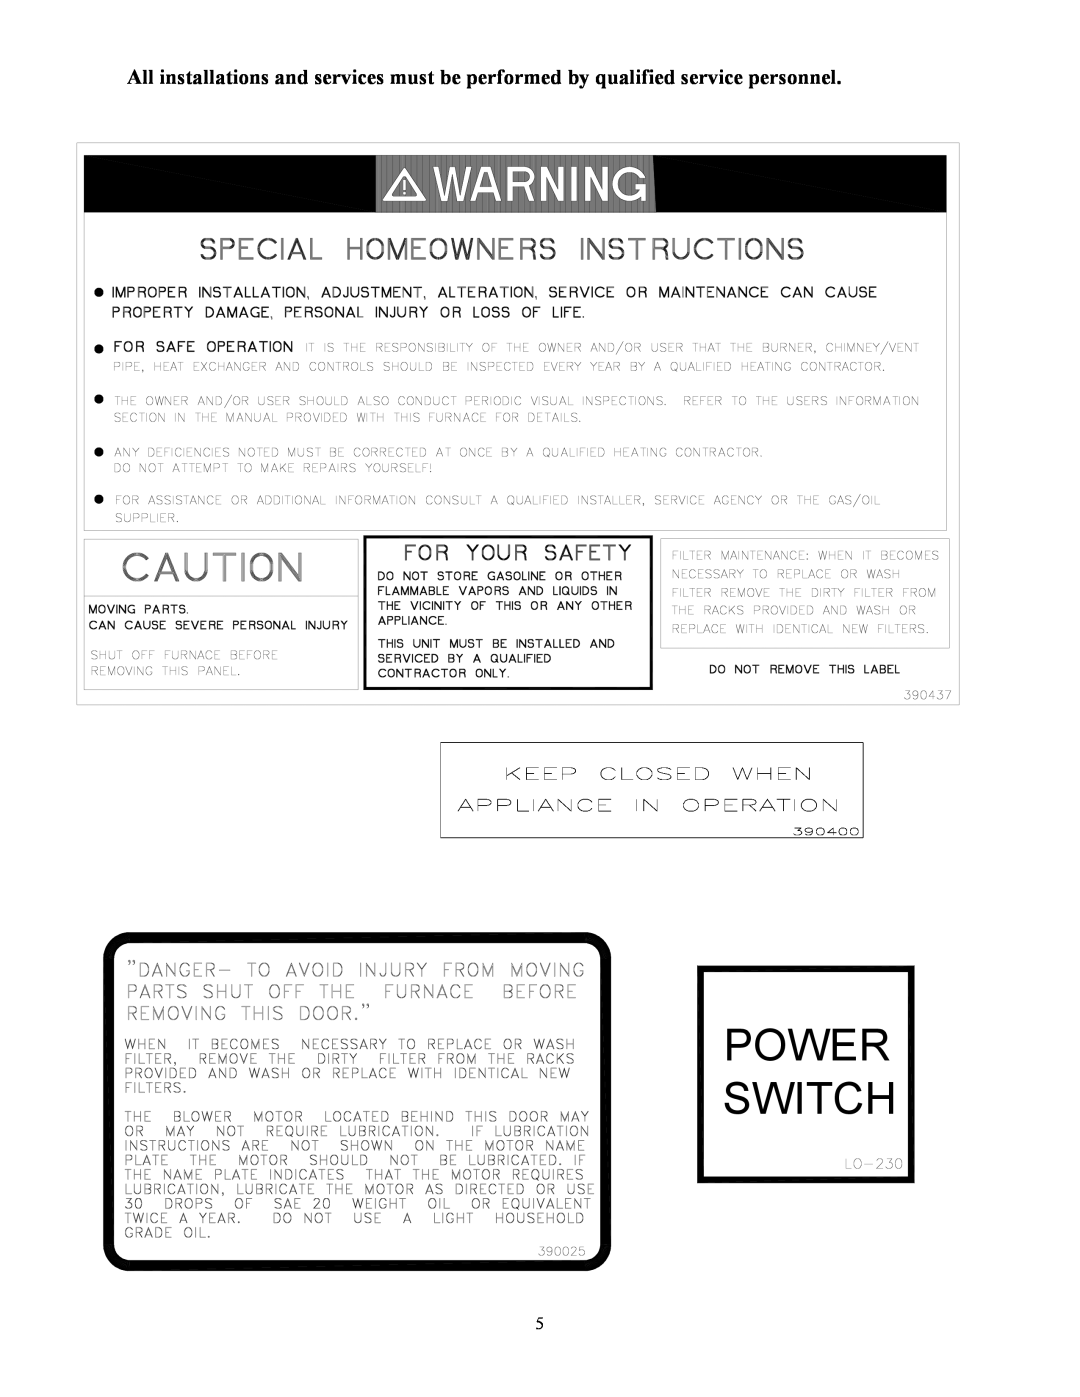 Thermo Products OMC-70, GMC-85 service manual Power Switch 